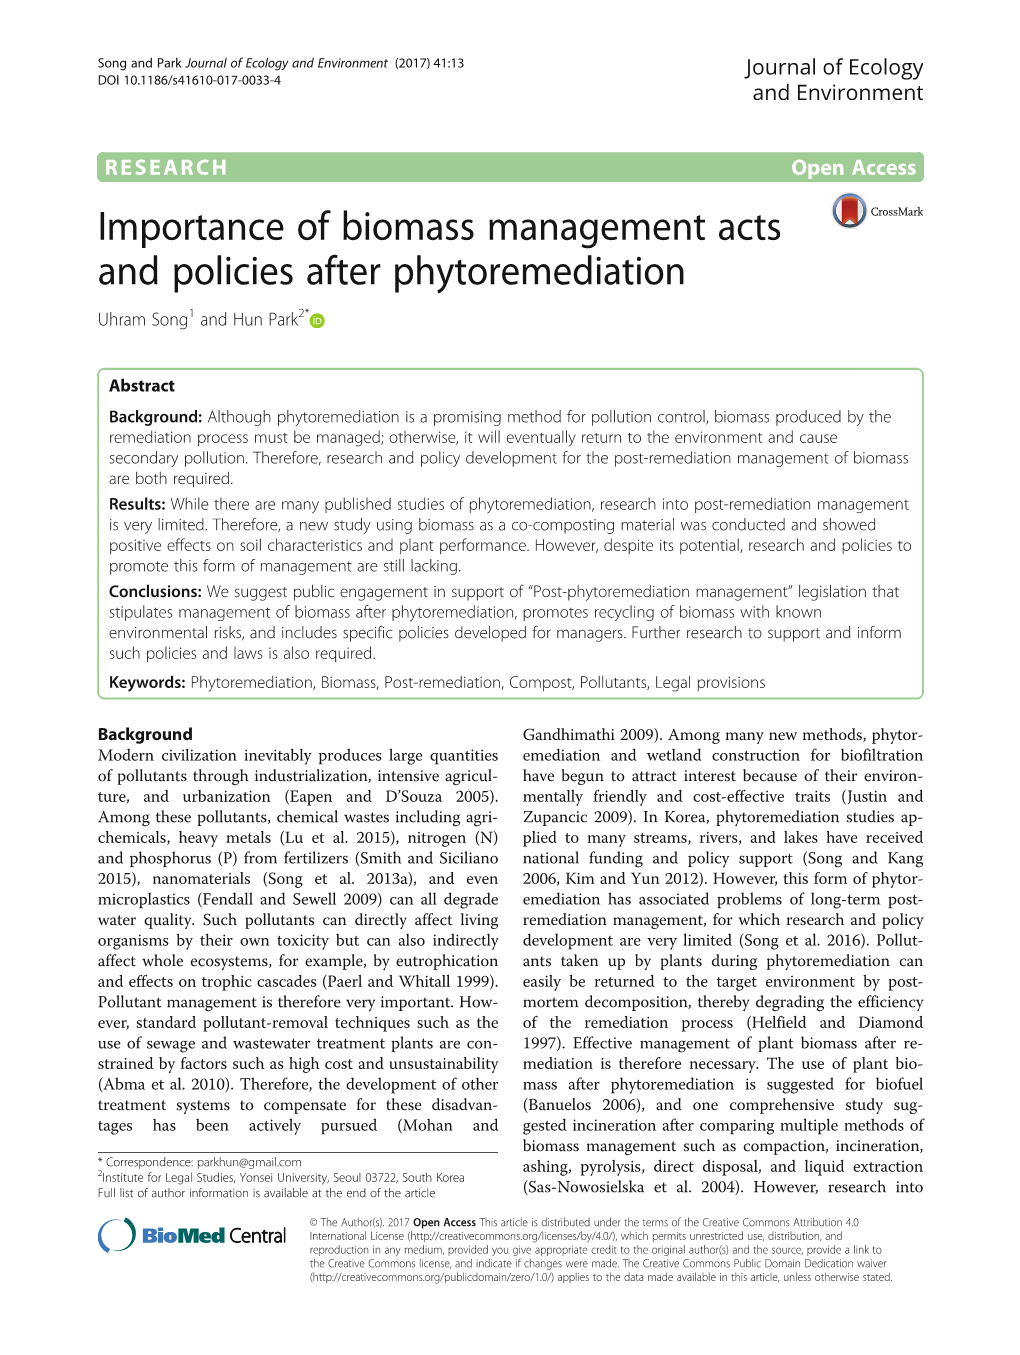 Importance of Biomass Management Acts and Policies After Phytoremediation Uhram Song1 and Hun Park2*